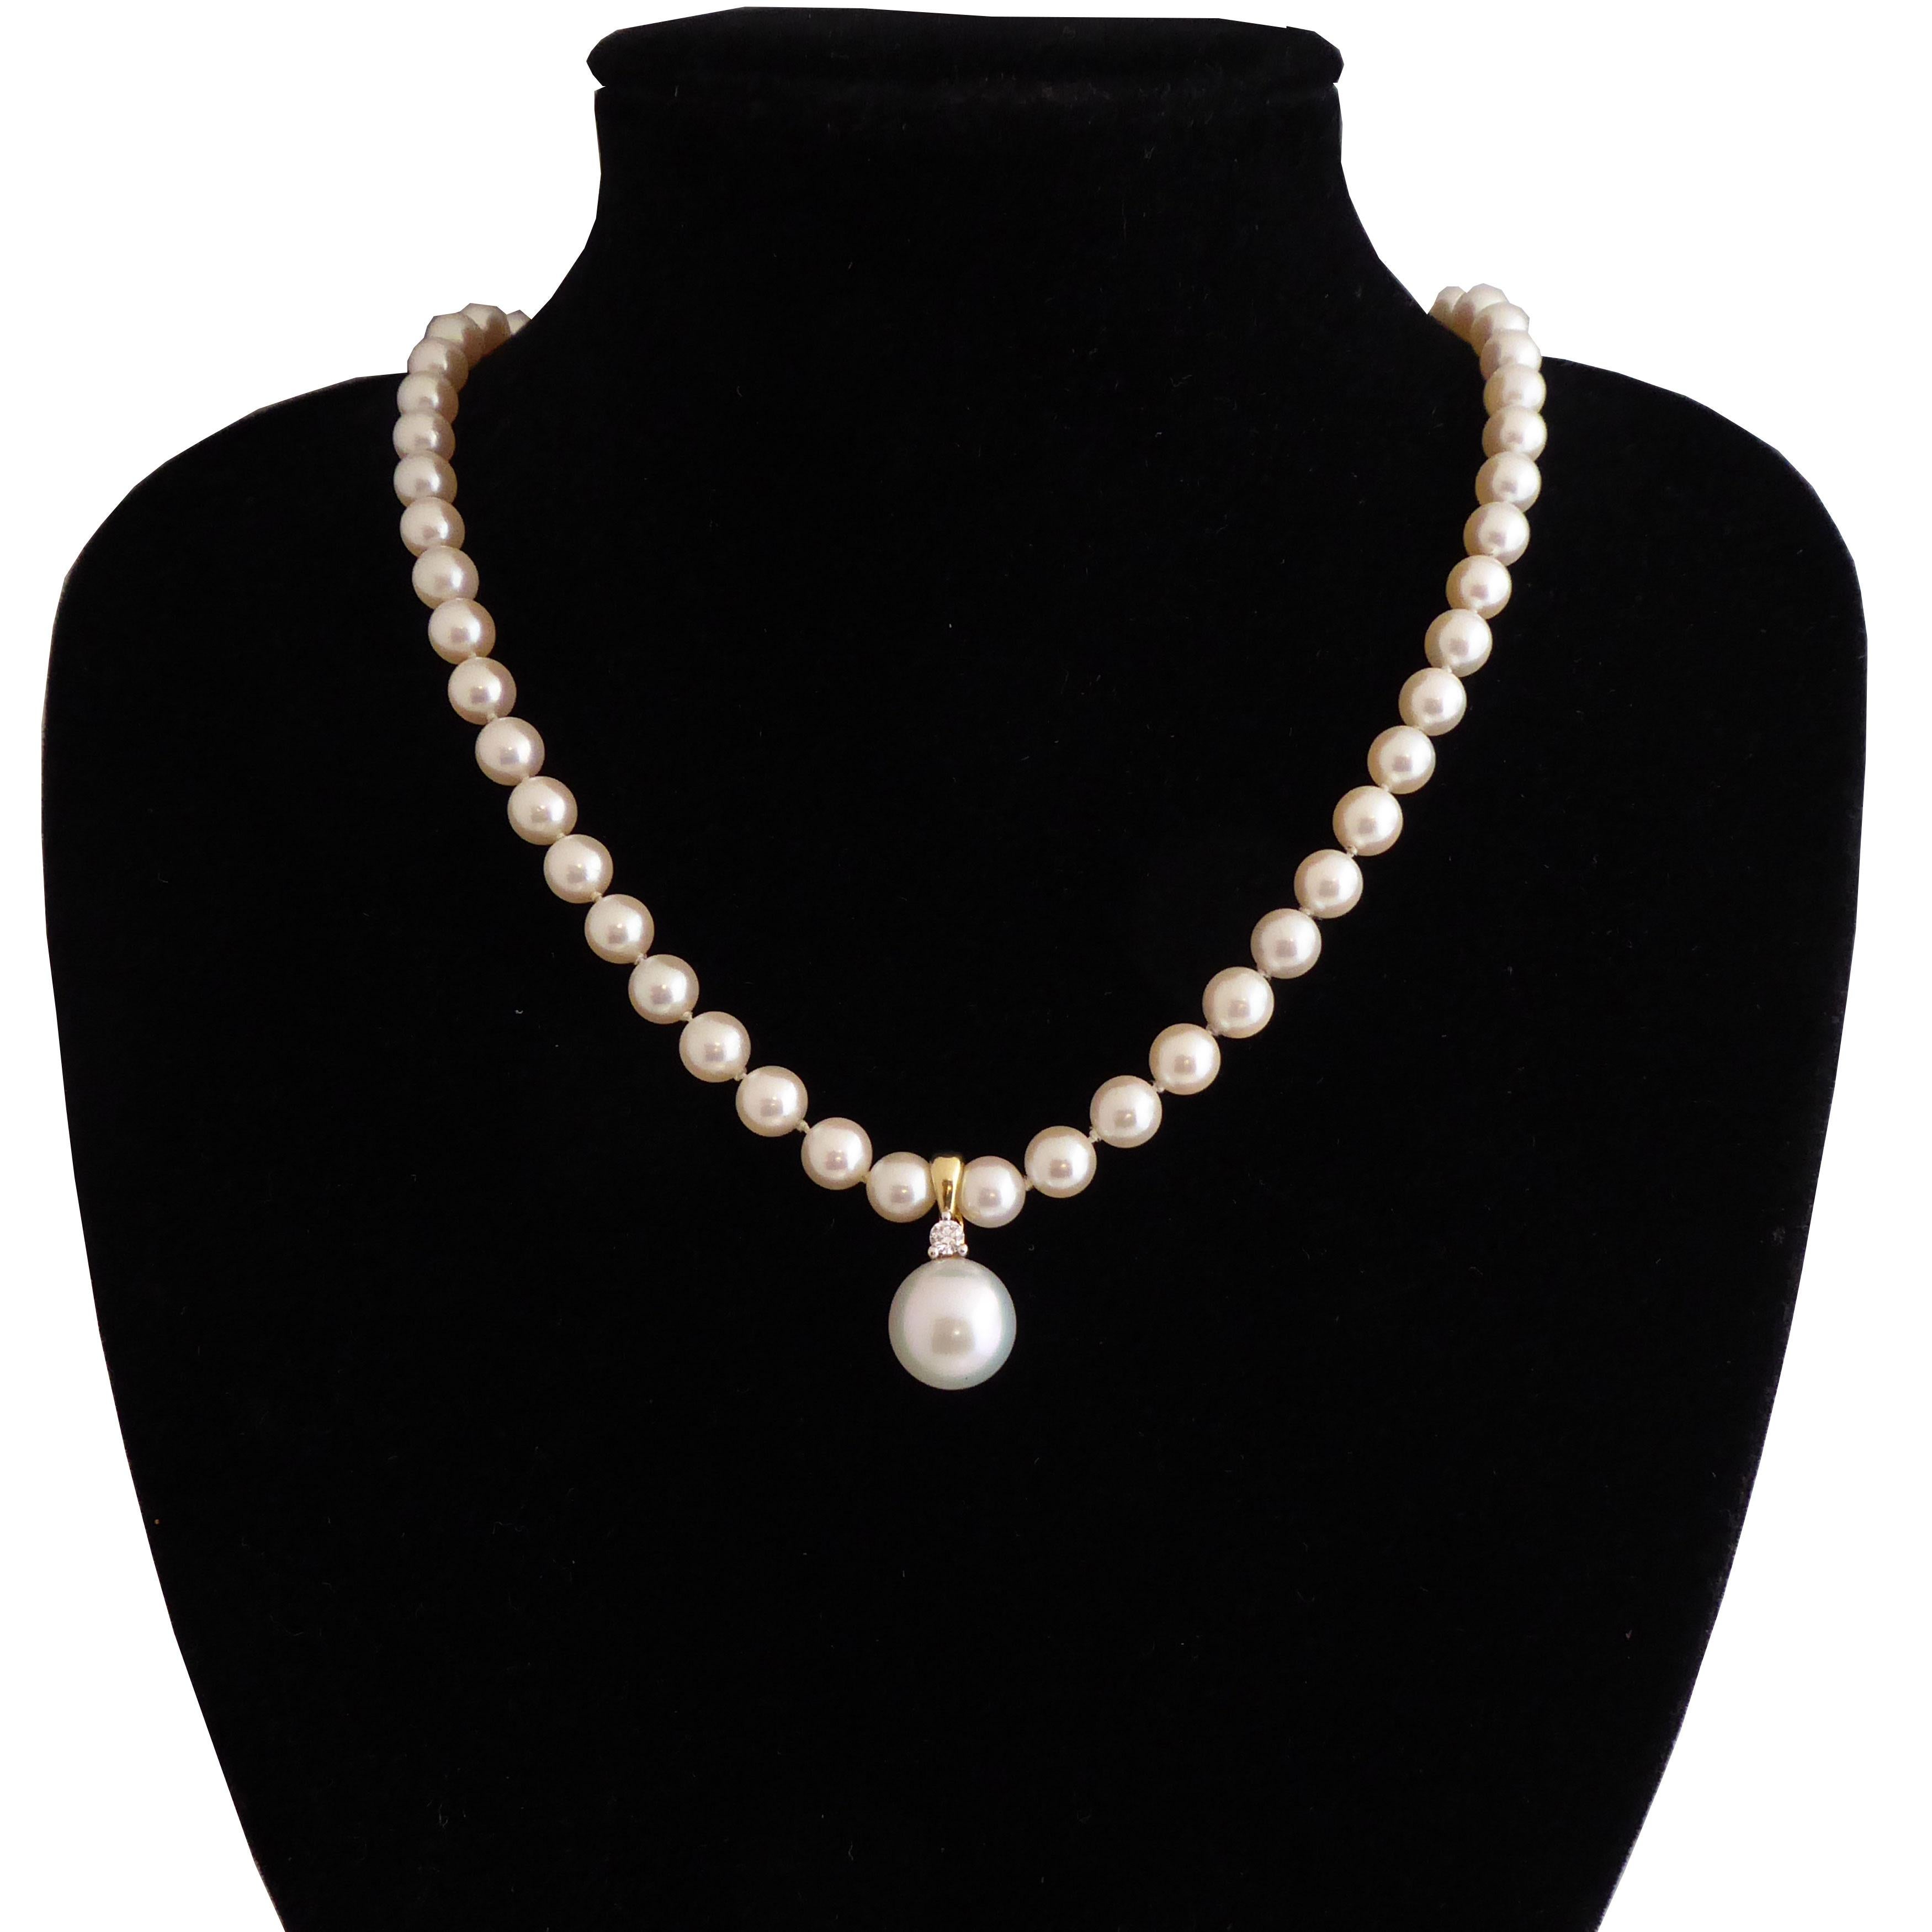 A South Sea pearl and diamond set pendant, consisting of a half-drilled cultured South Sea pearl measuring 12.1mm diameter, peg set to a yellow 